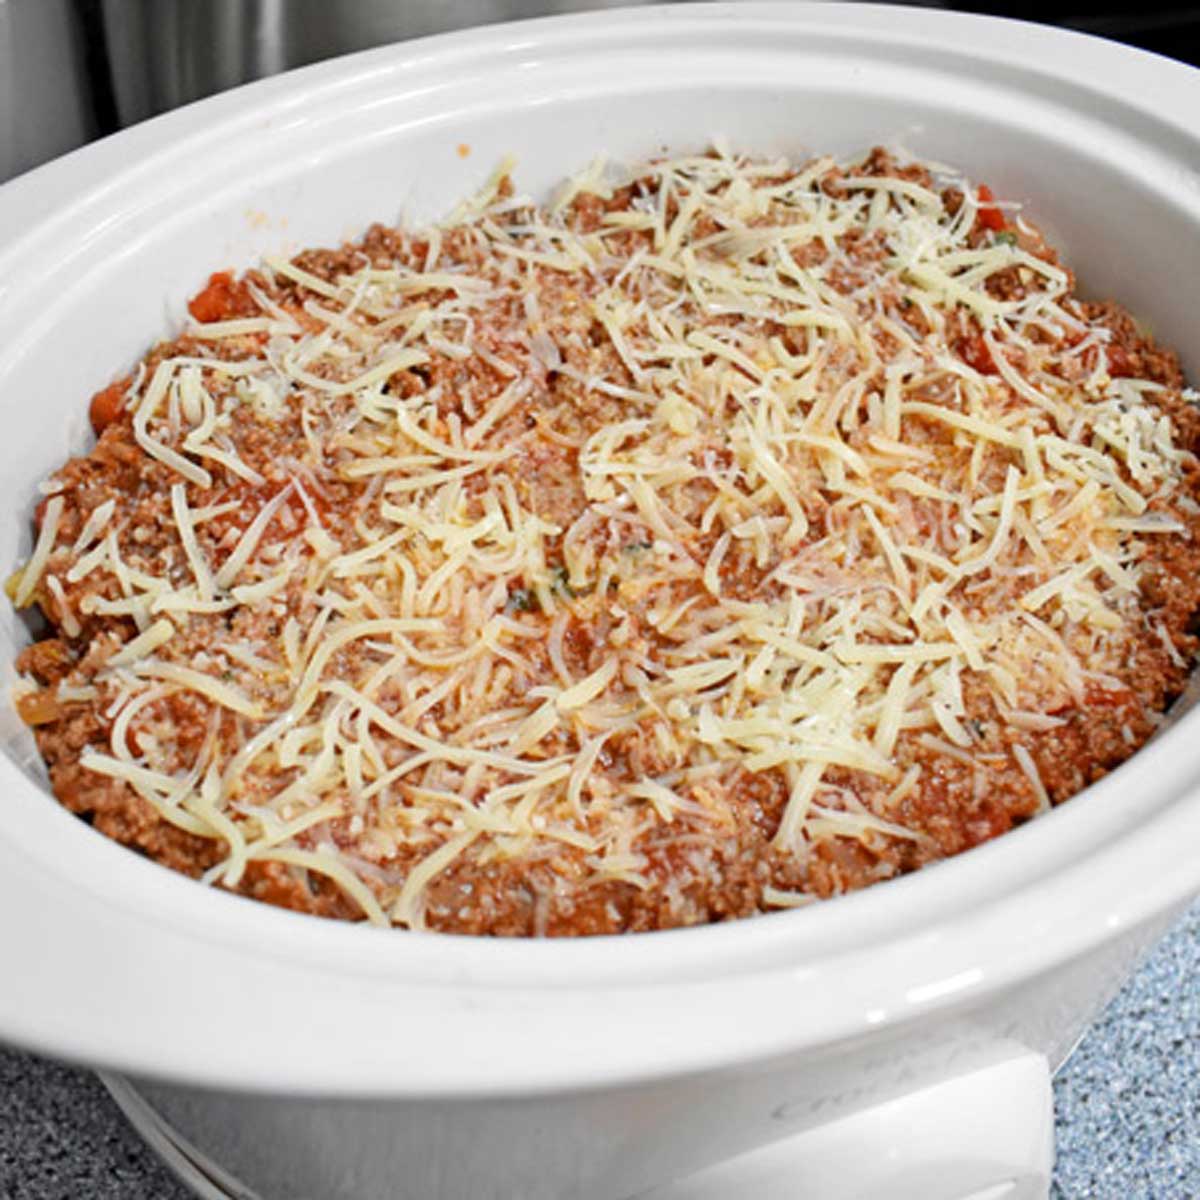 Uncooked gluten free lasagna in a white slow cooker.